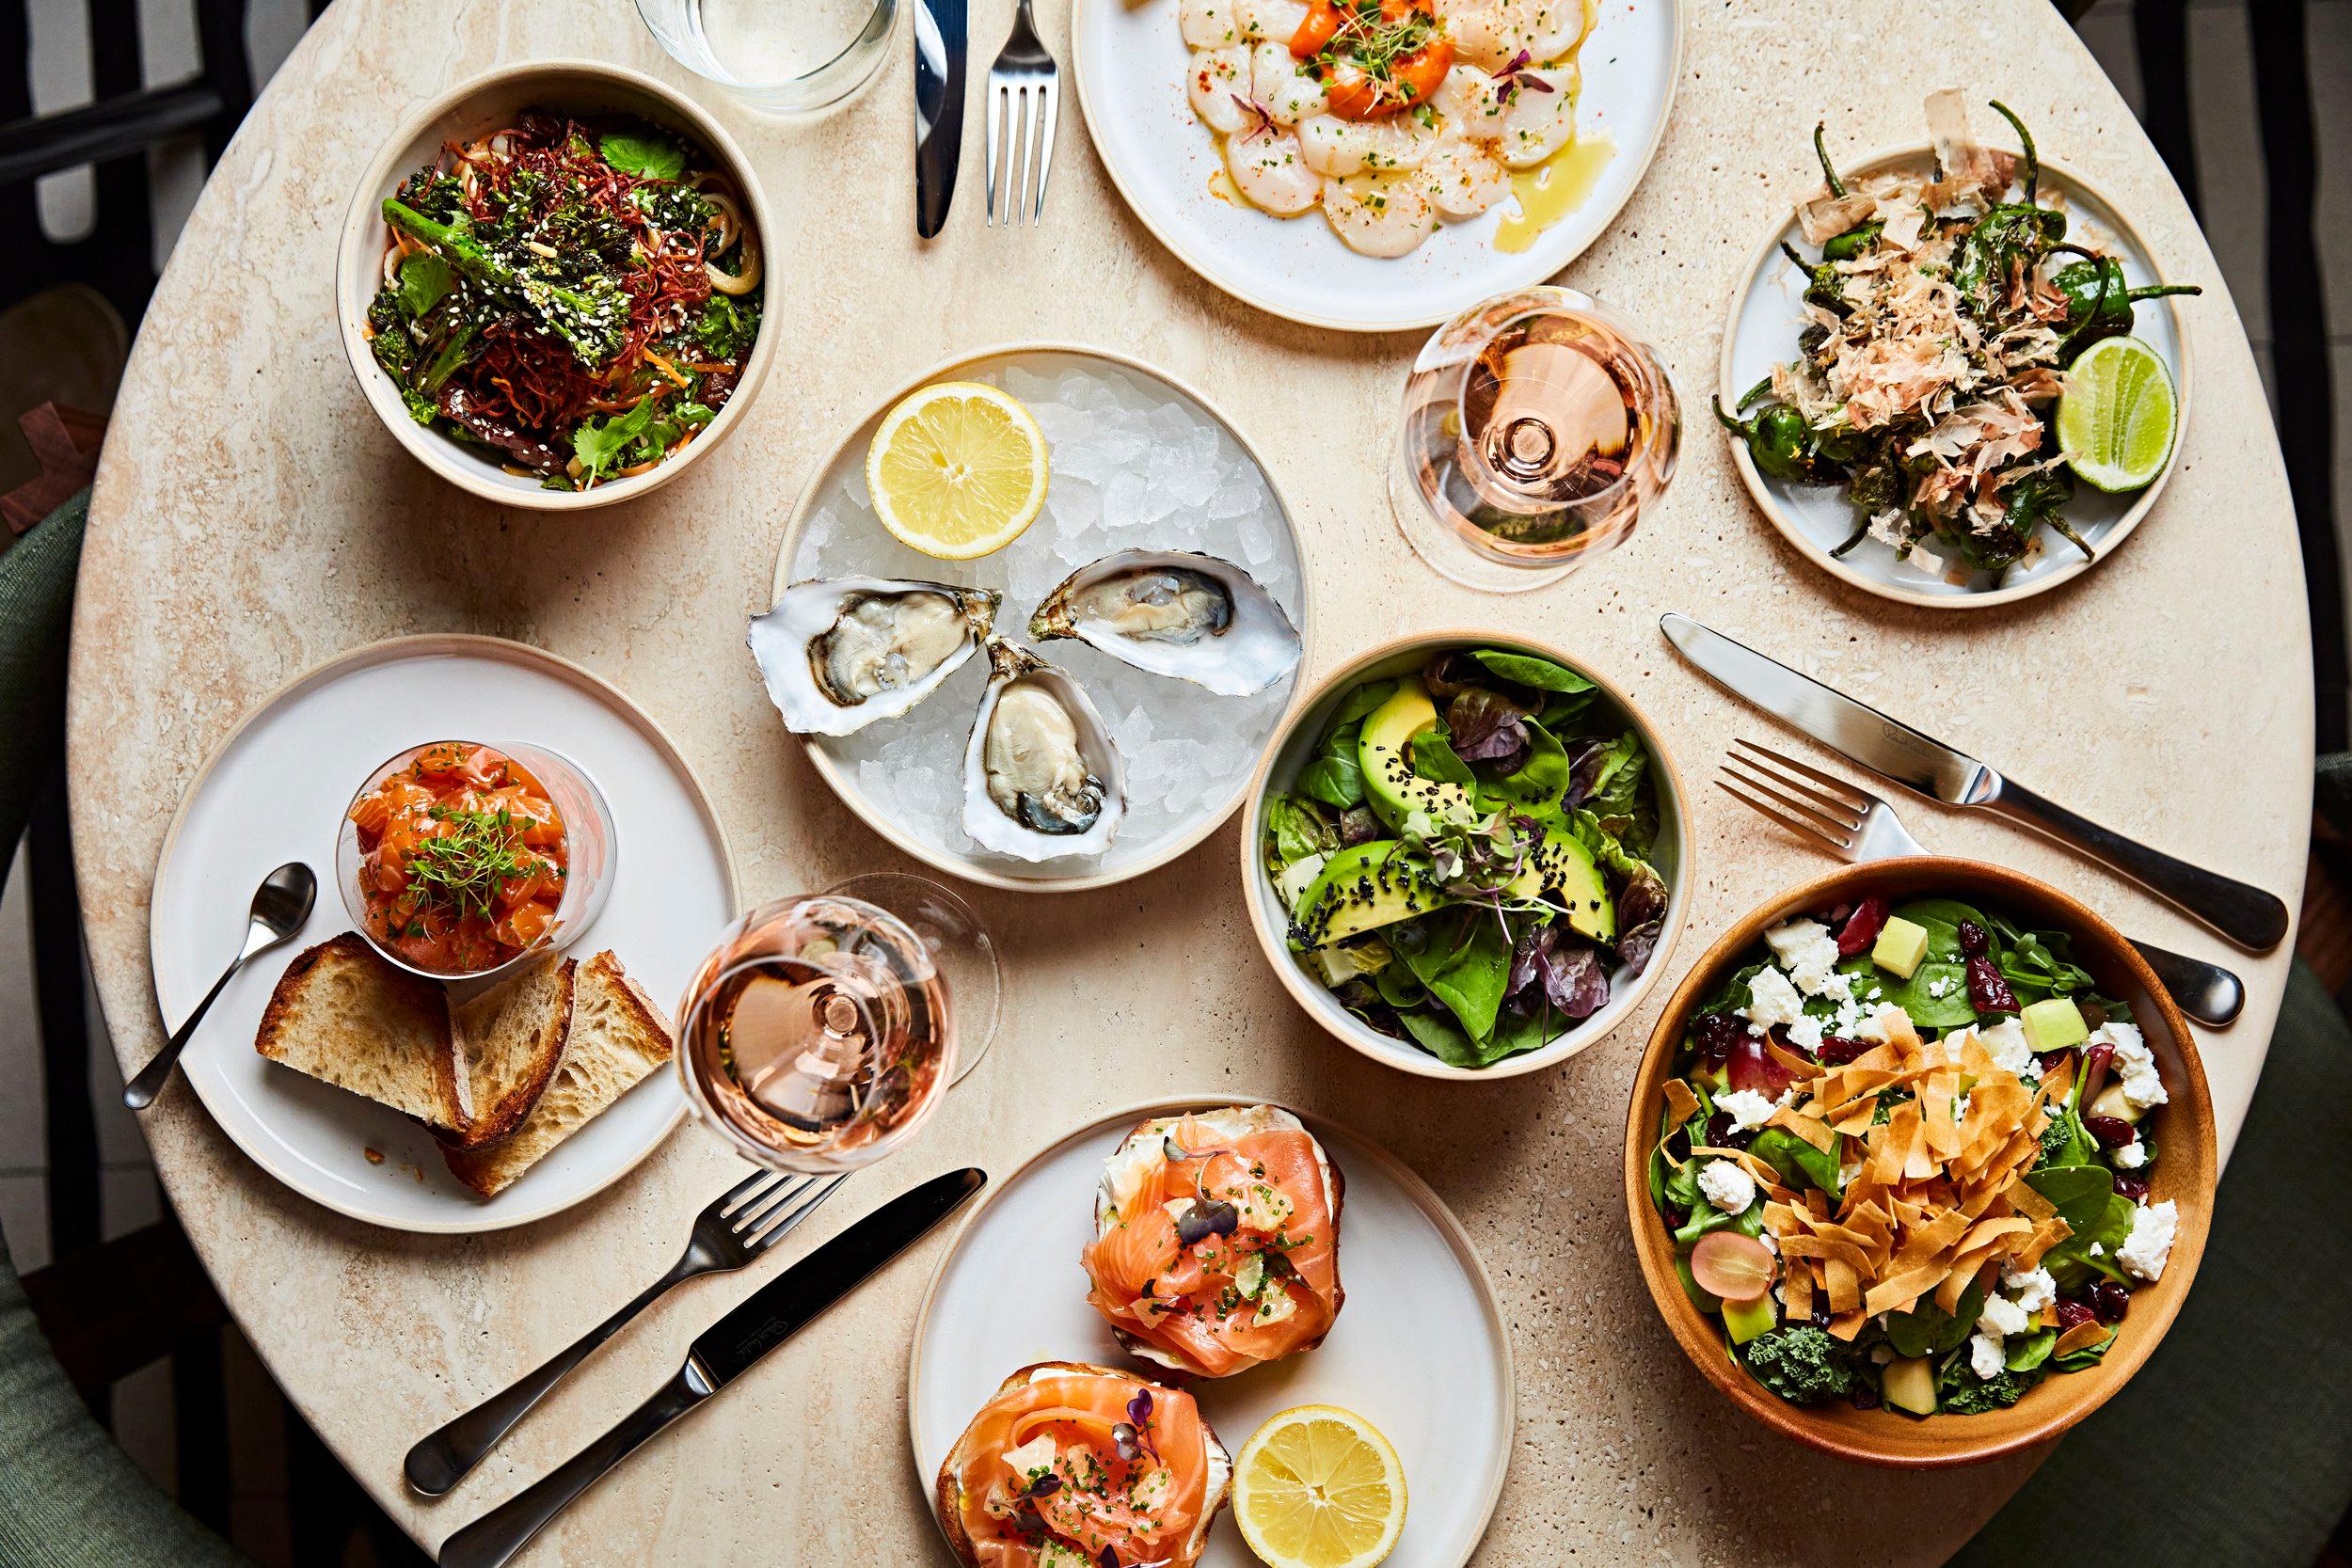 Lebanese hotspot Meat the Fish is opening in Dubai